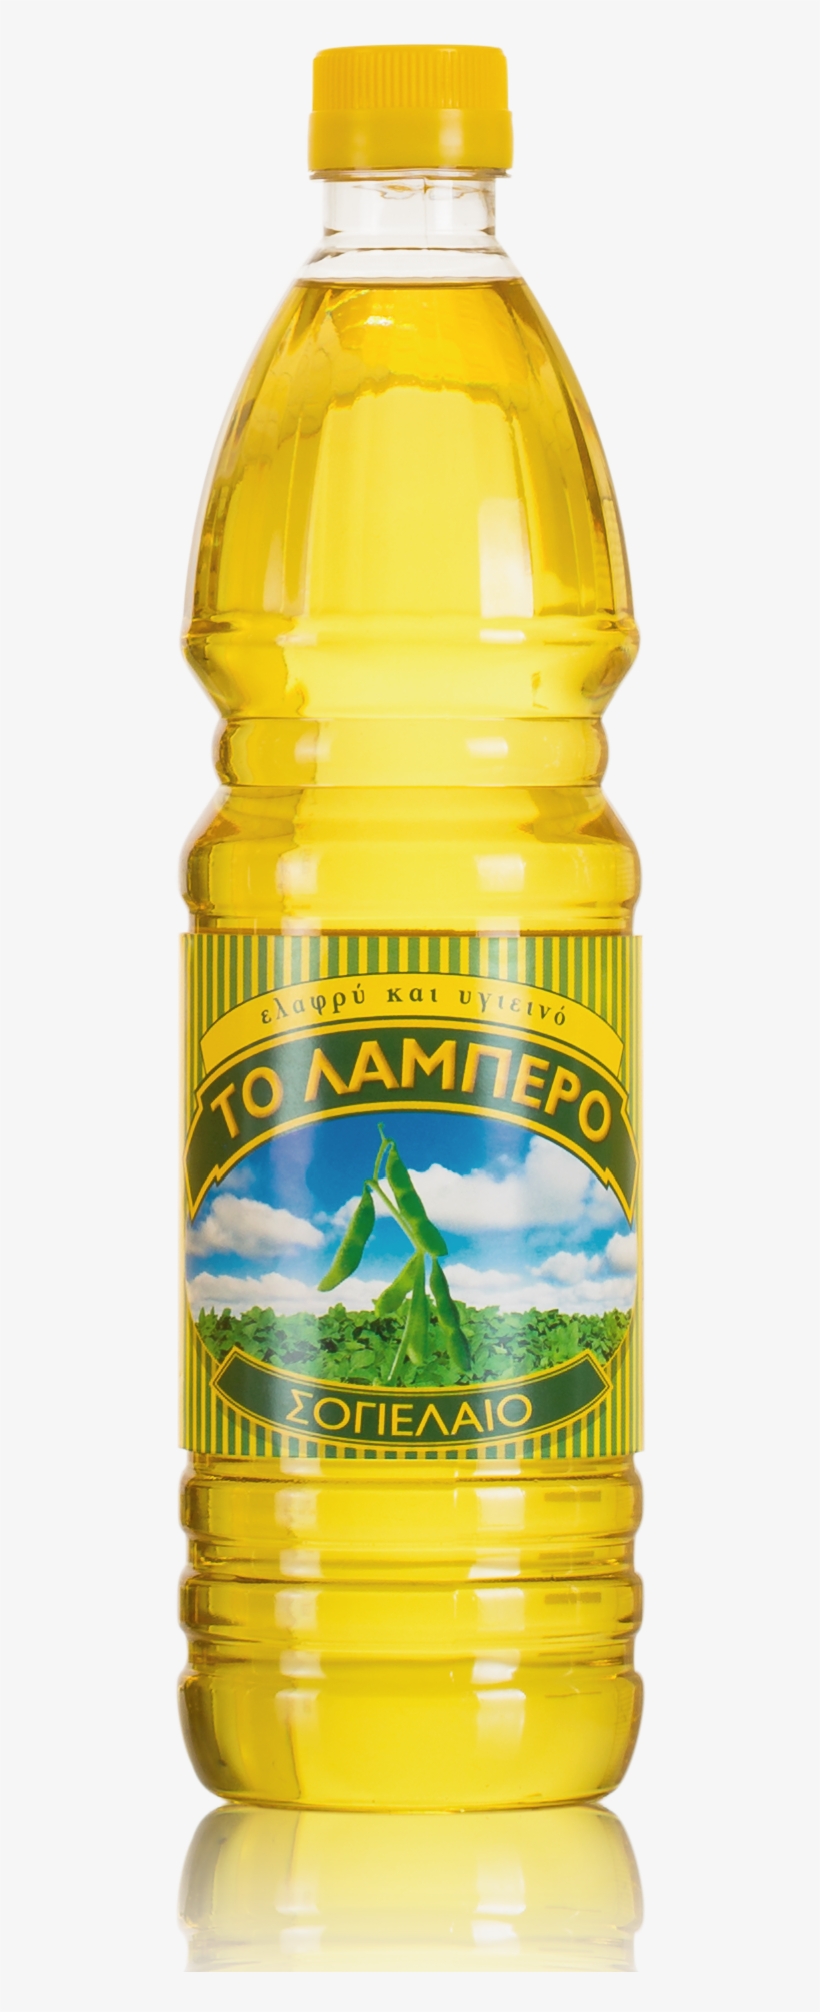 Lampero Soybean Oil - Soybean Oil Png, transparent png #506186